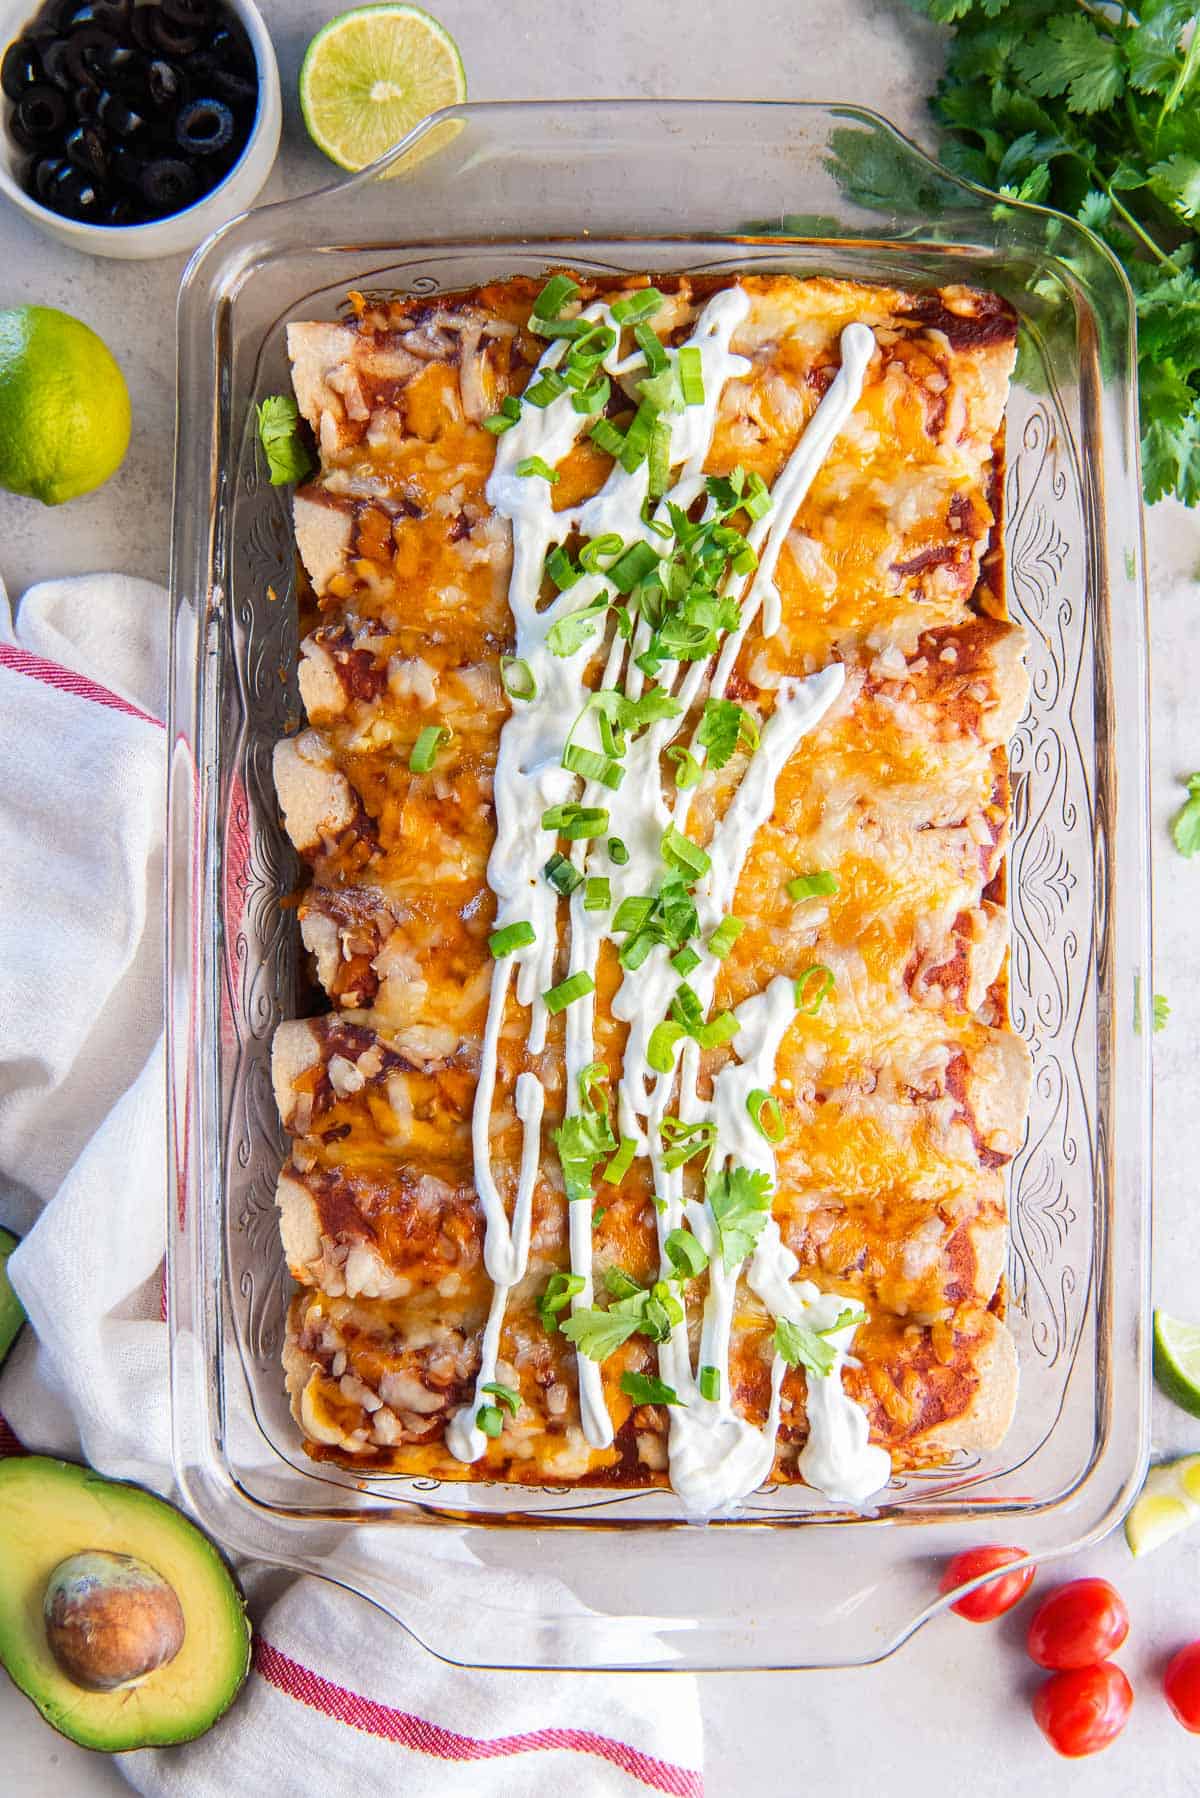 Chicken enchiladas in a baking dish topped with sour cream and sliced green onions.